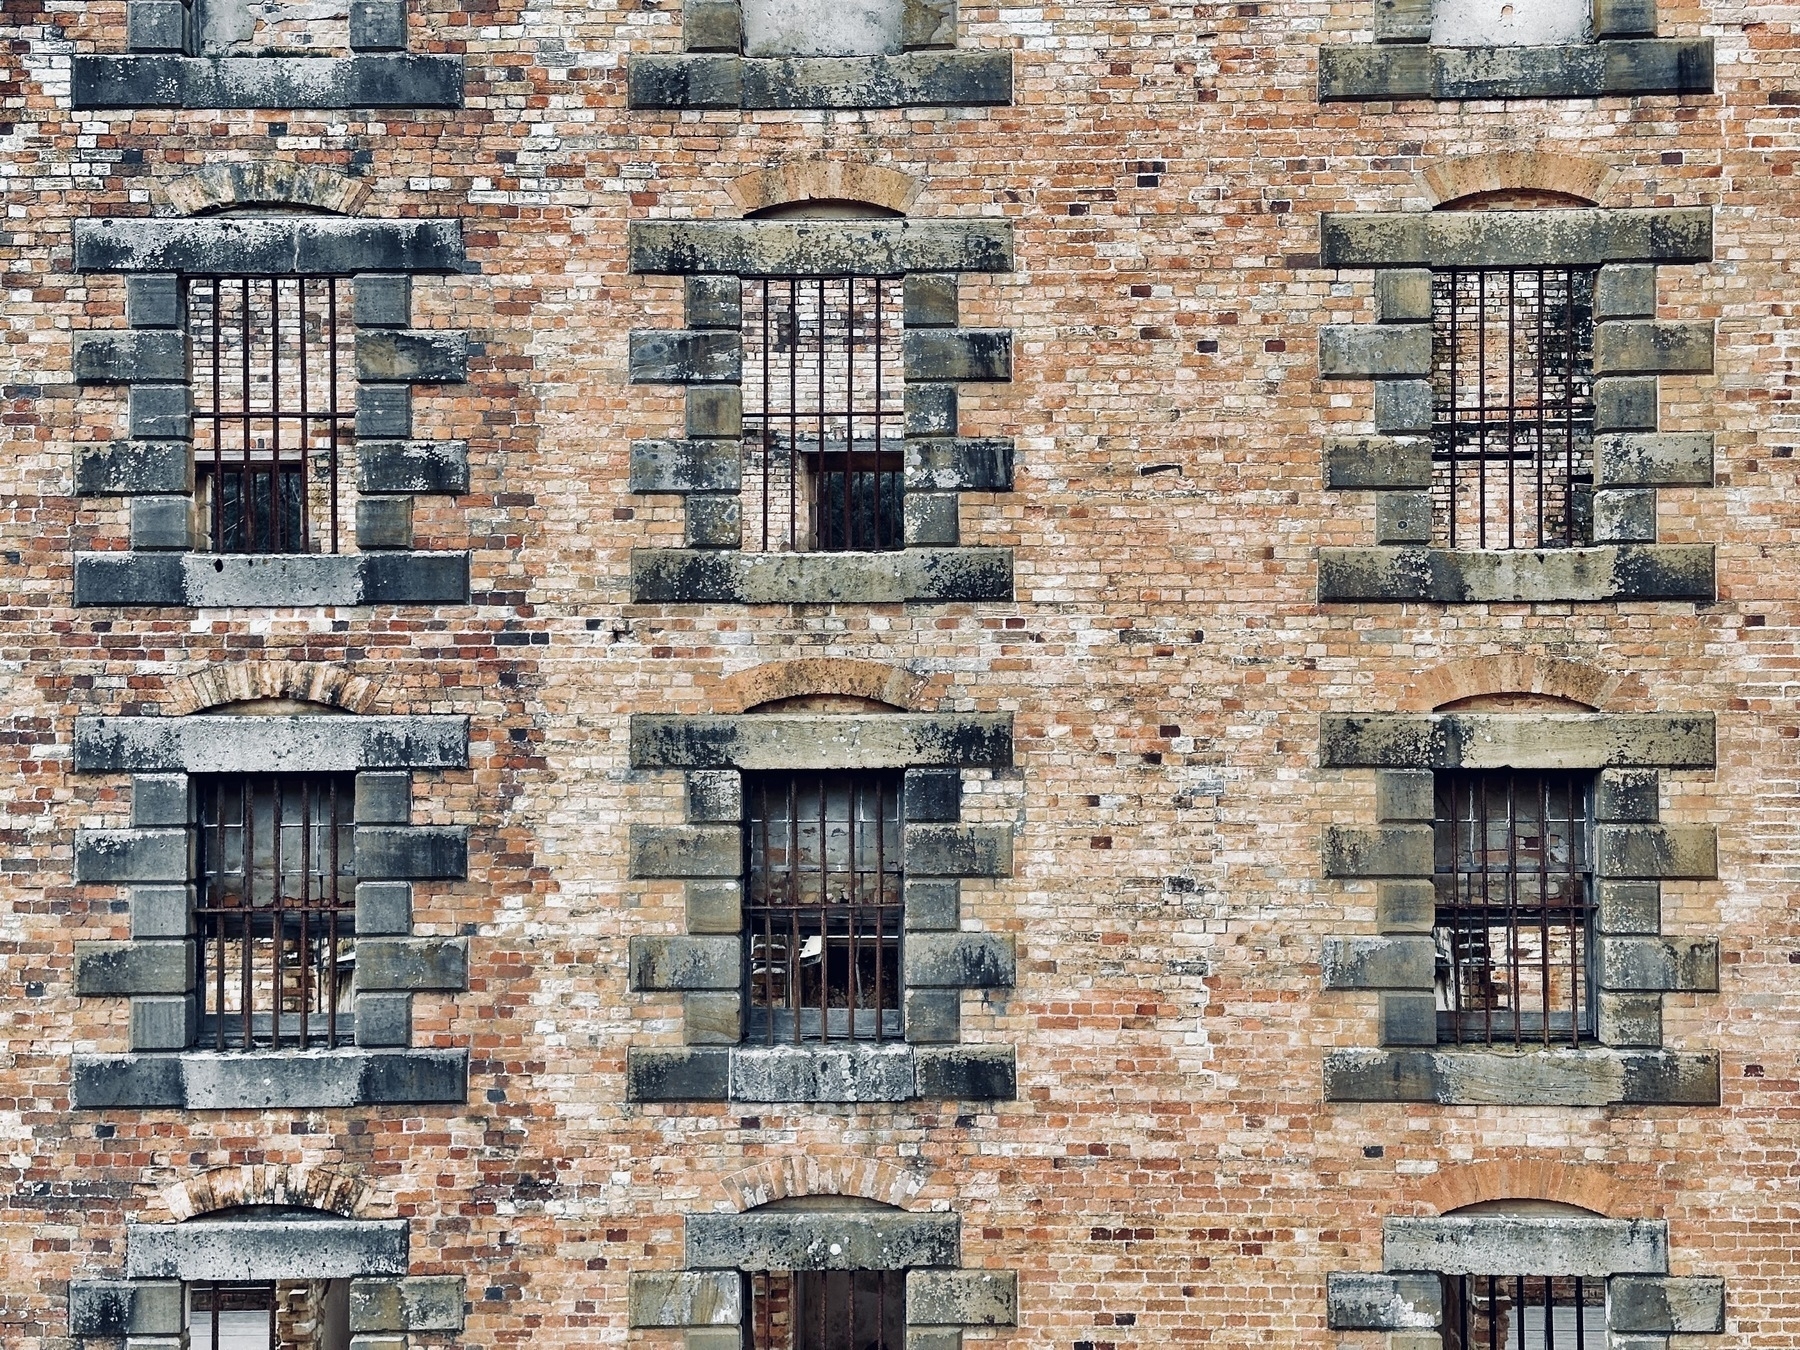 A red brick wall with several old gaol cell windows.